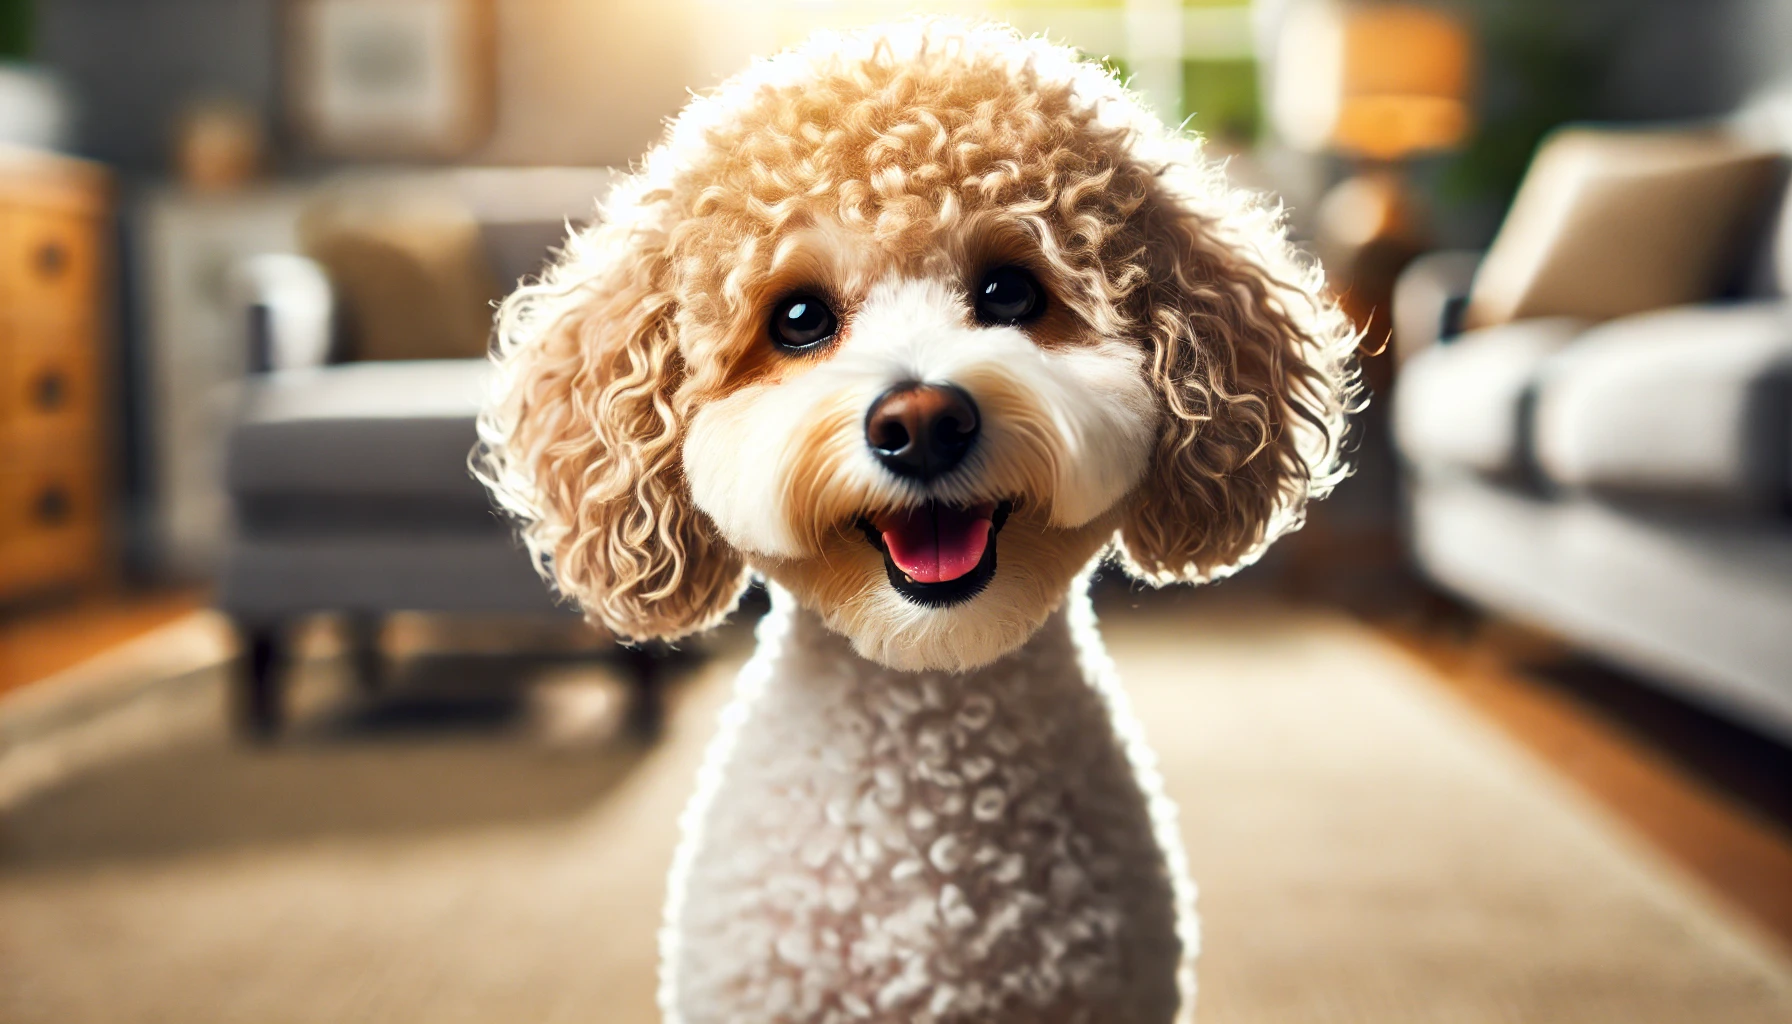  image of a small and curly Maltipoo that has just been groomed. The dog looks like it is smiling, appearing clean, brushed, and happy